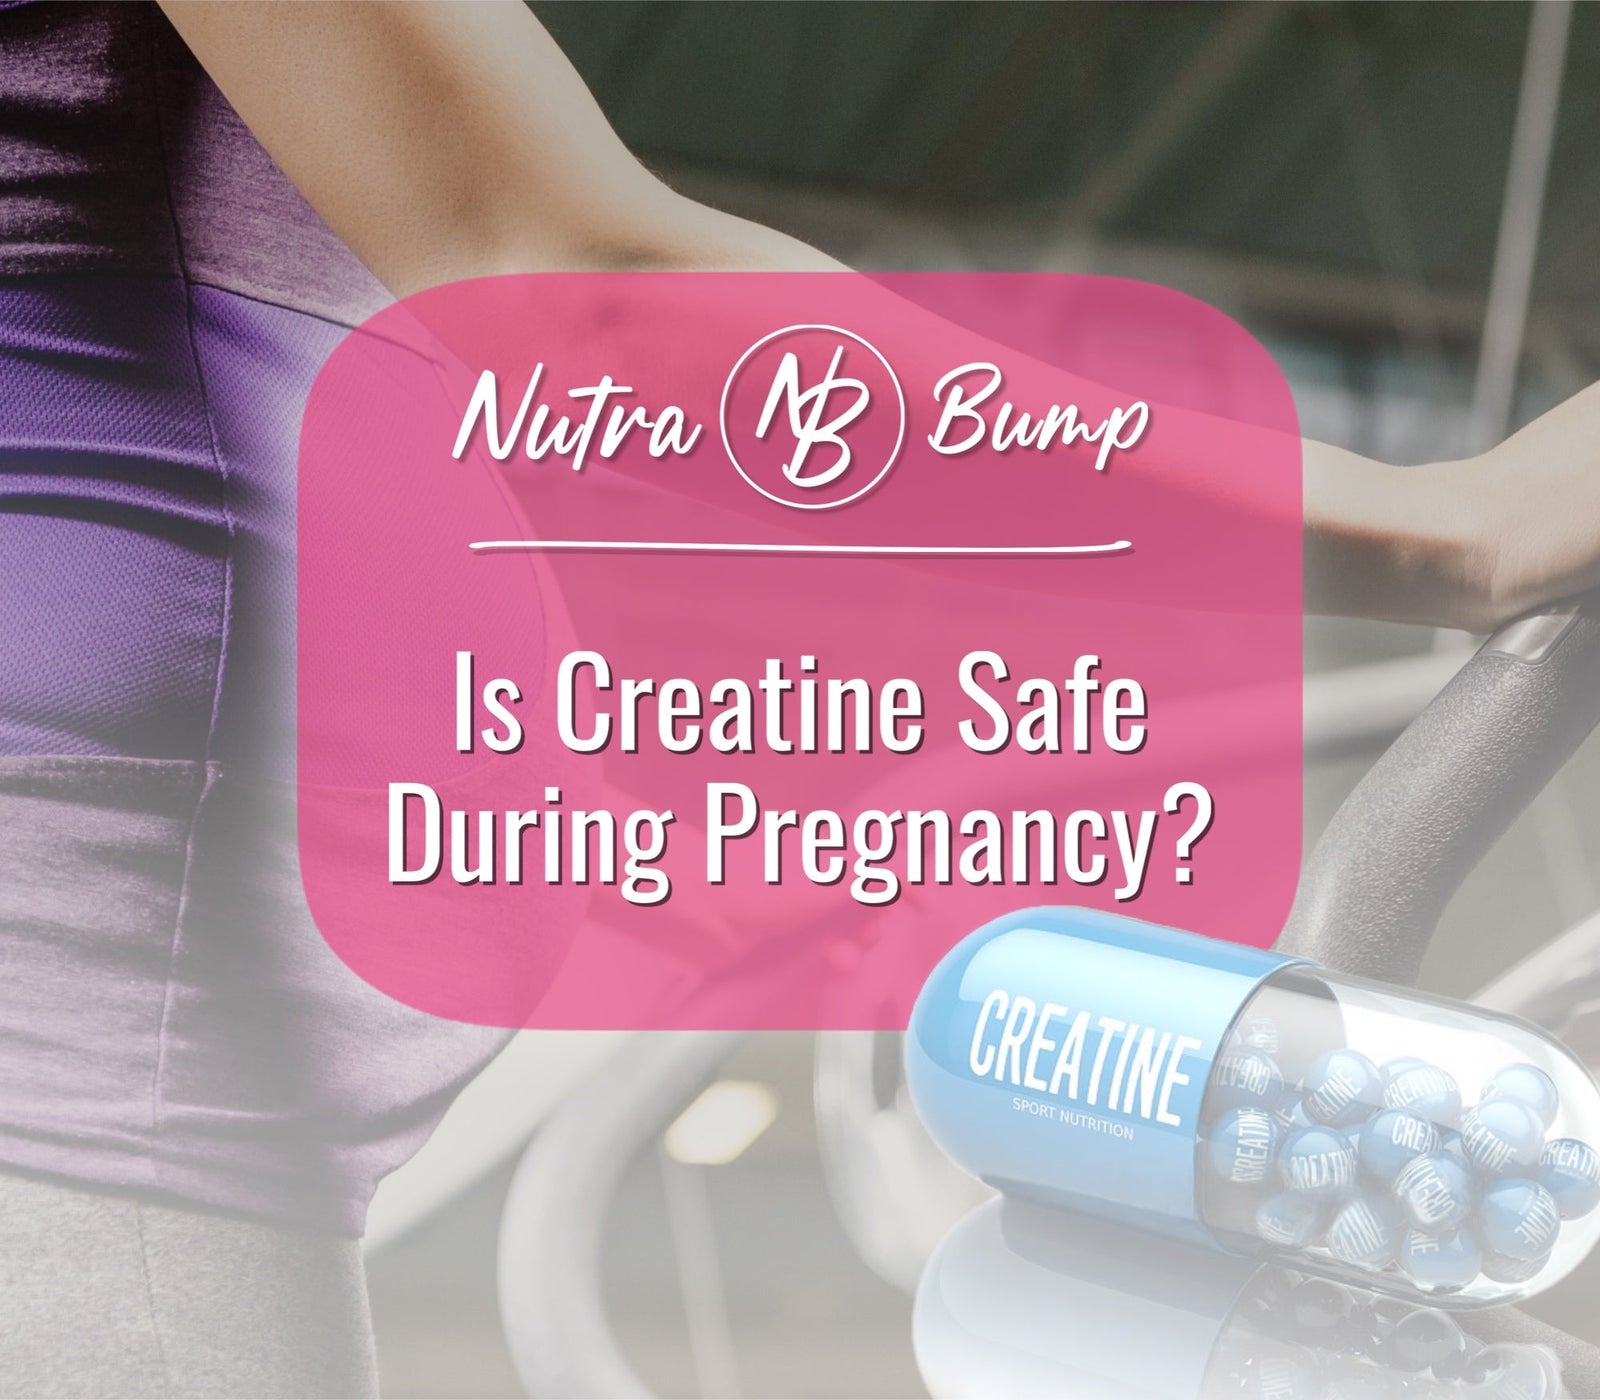 Is Creatine Safe During Pregnancy? - NutraBump Nutrition bumped up, creatine, nutrabump, pregnancy creatine, pregnancy pre workout, prenatal creatine